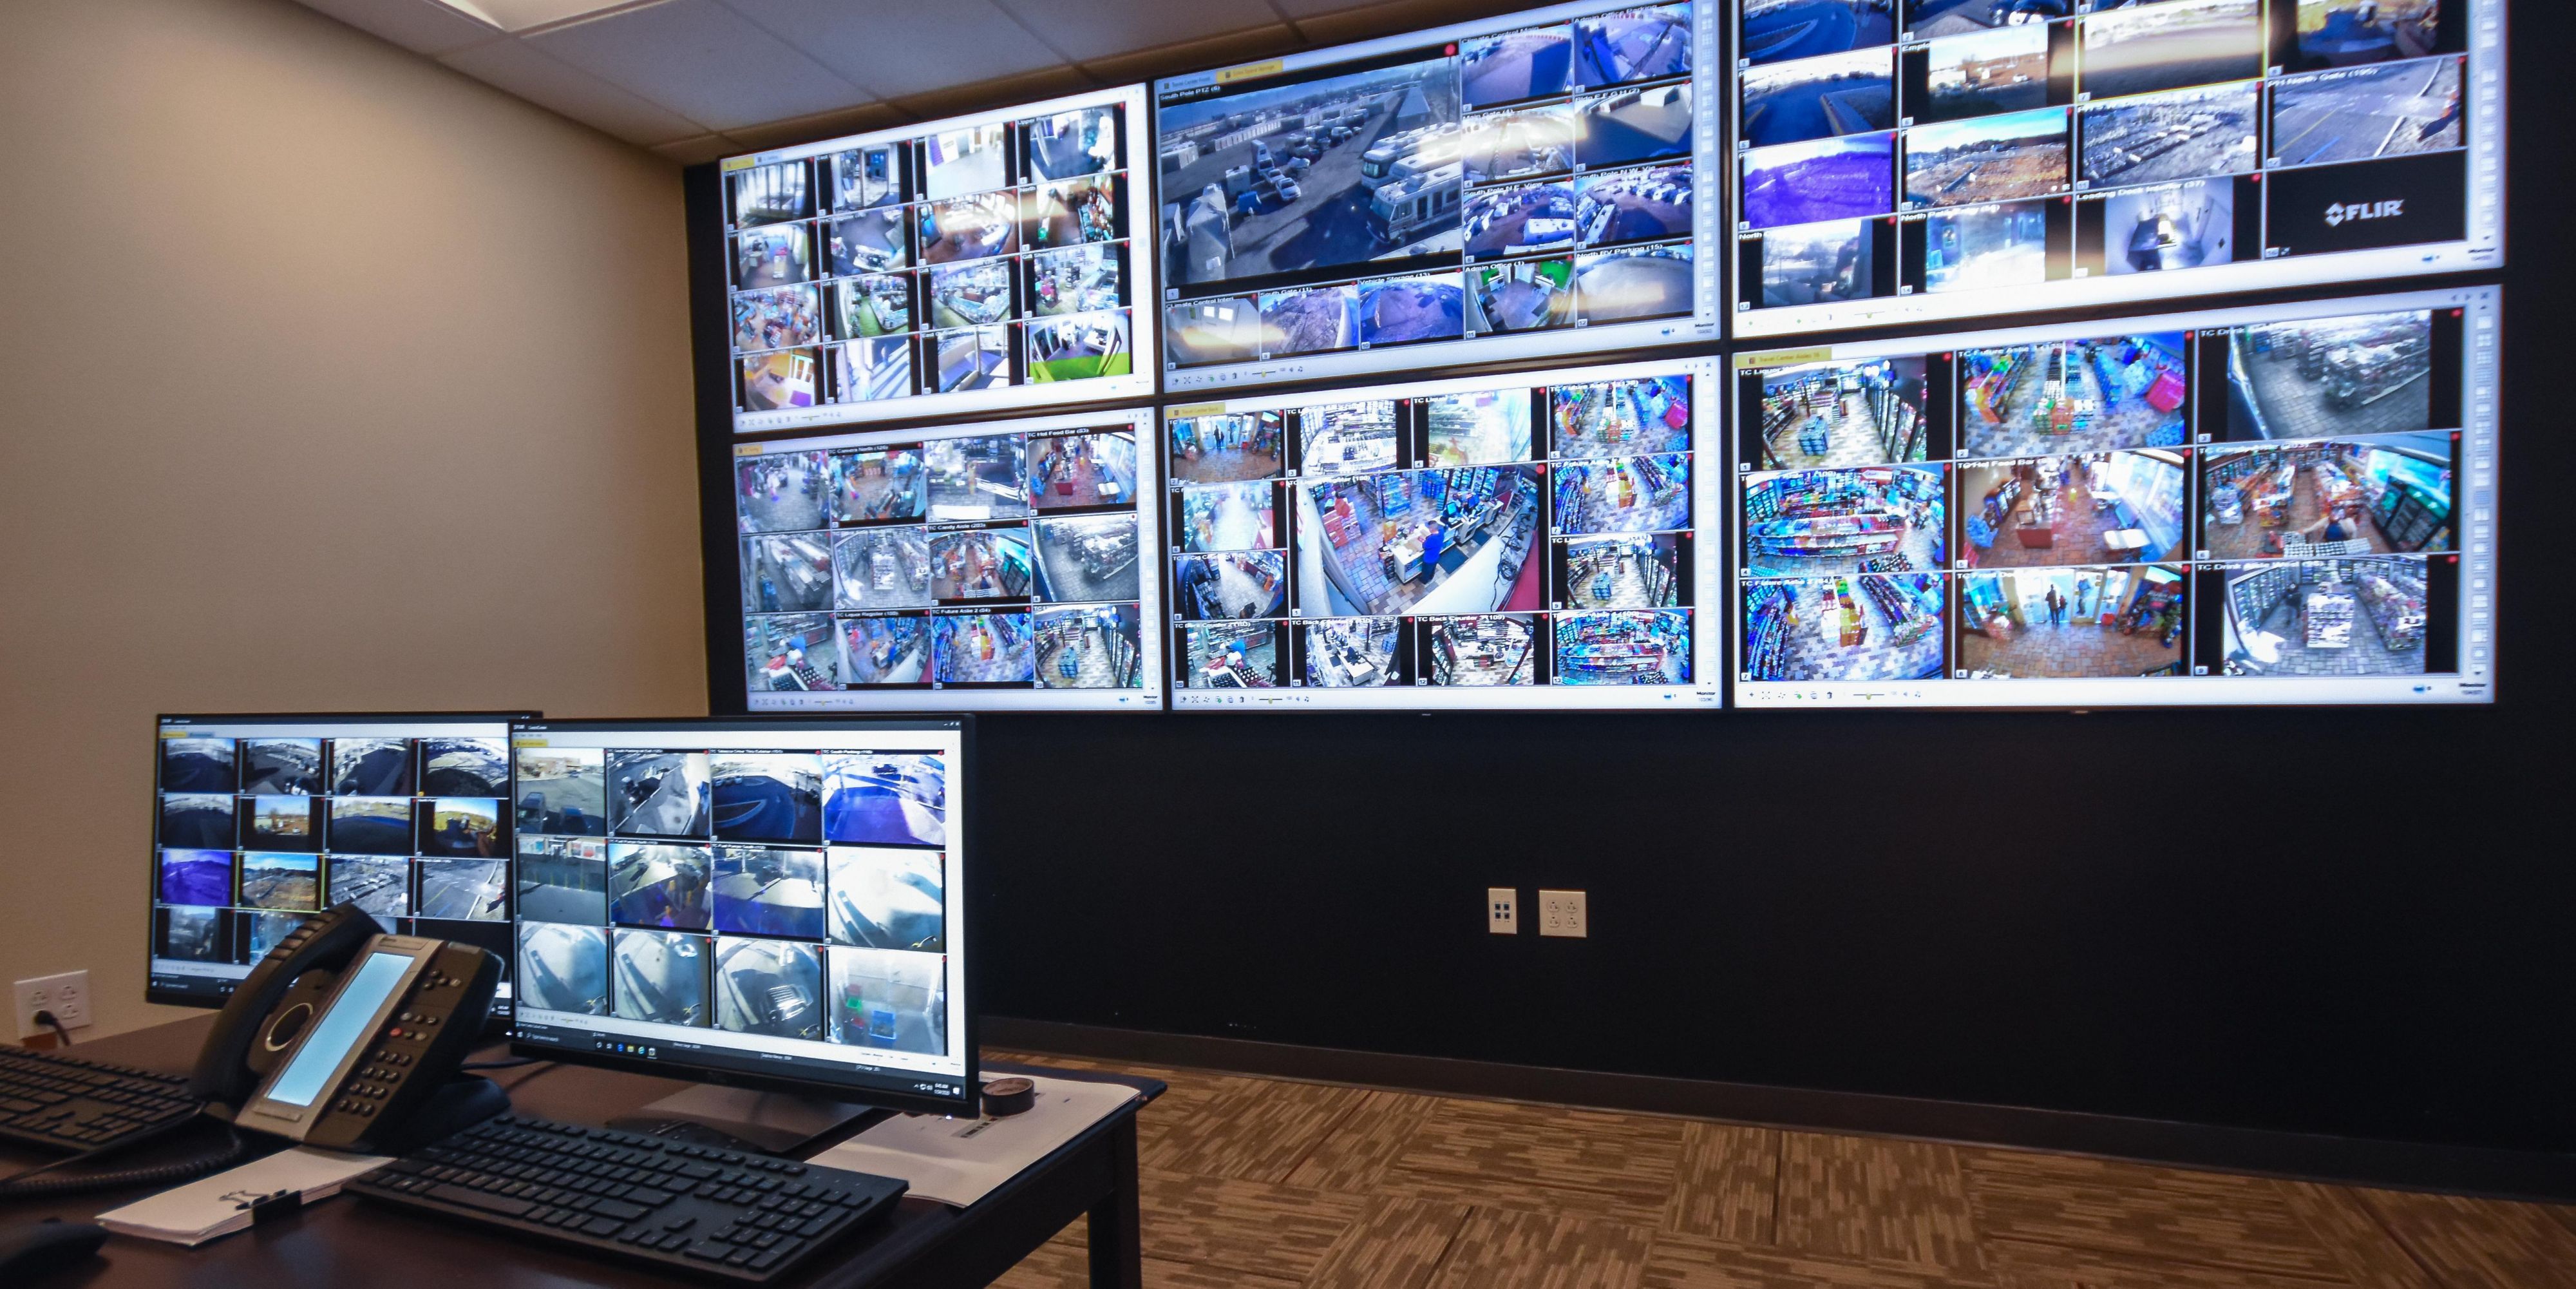 In addition to our live professional security patrols, our 24/7 security command center is equipped with a powerful video surveillance system and is located adjacent to the hotel and park area in the center of the nearly 80-acre Campus. It ensures public safety throughout the vast cultural, entertainment and office complex.